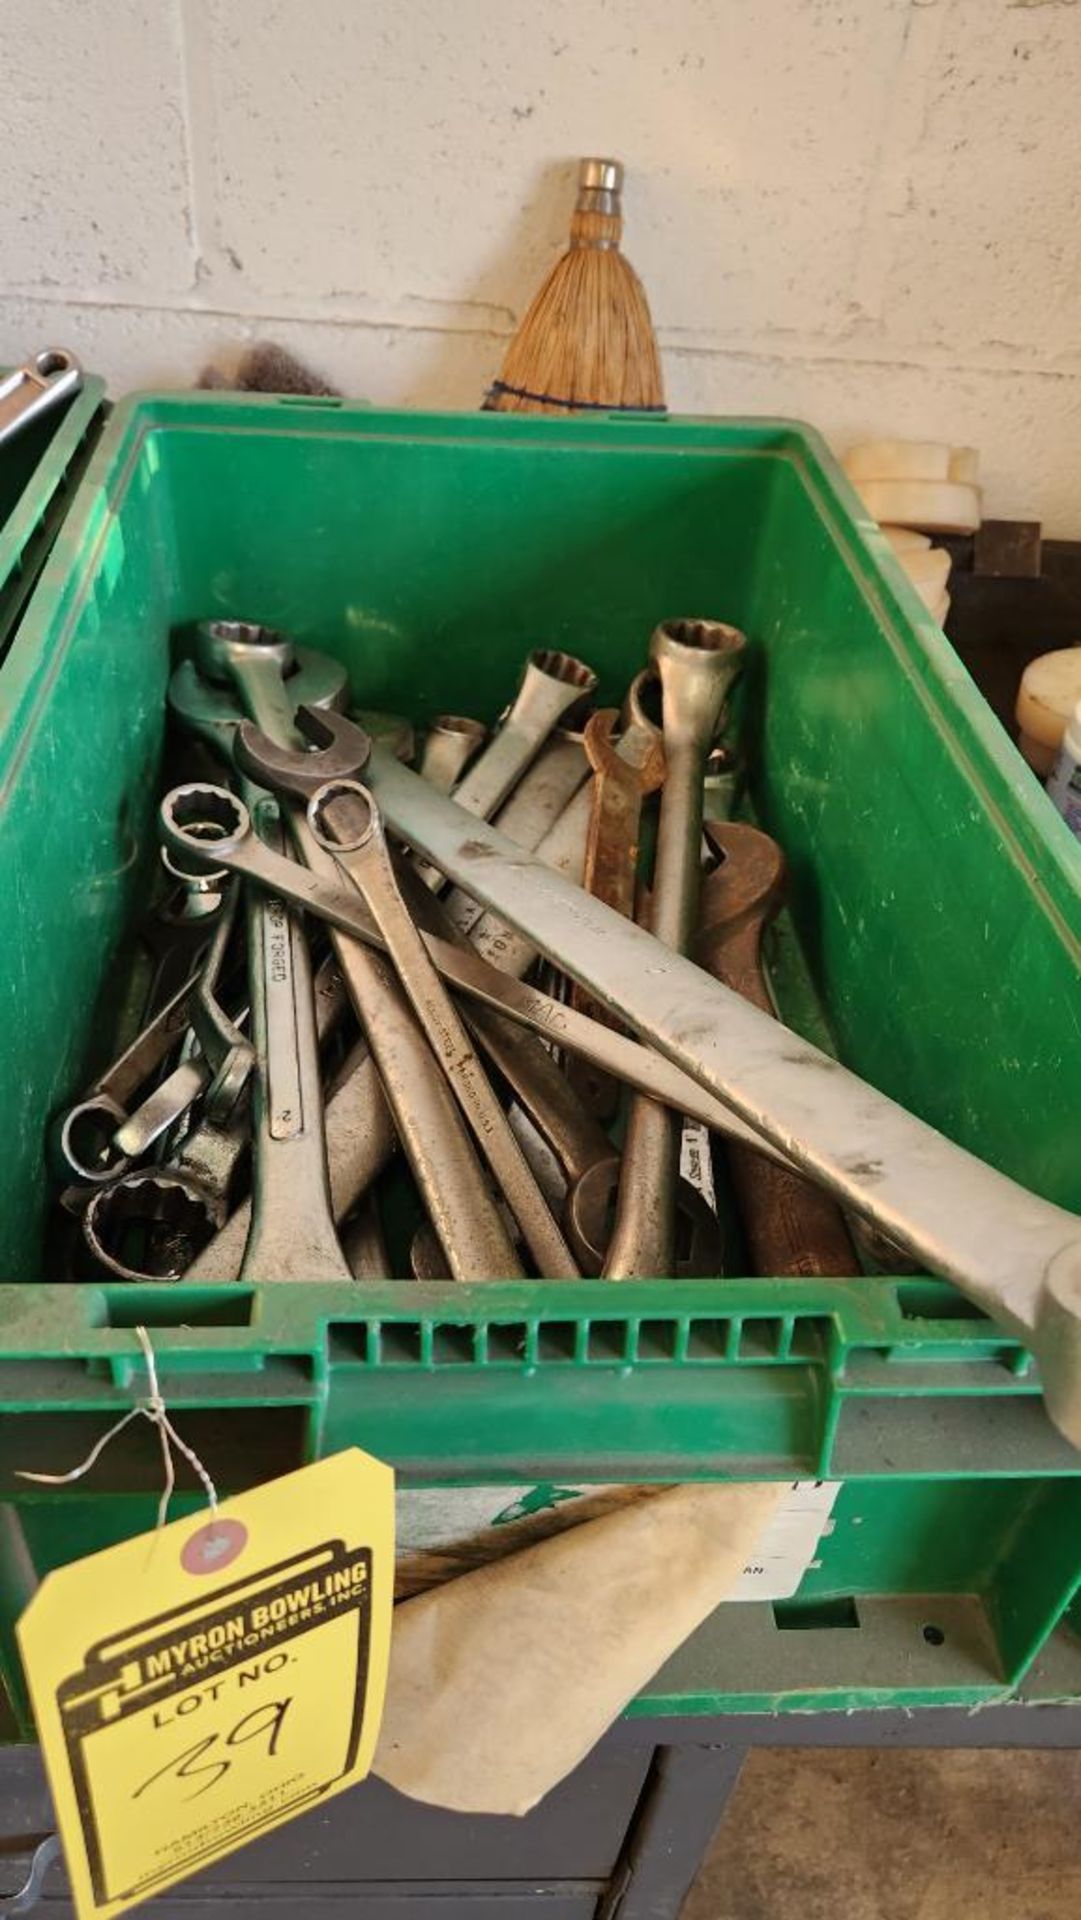 Bin of Assorted Wrenches